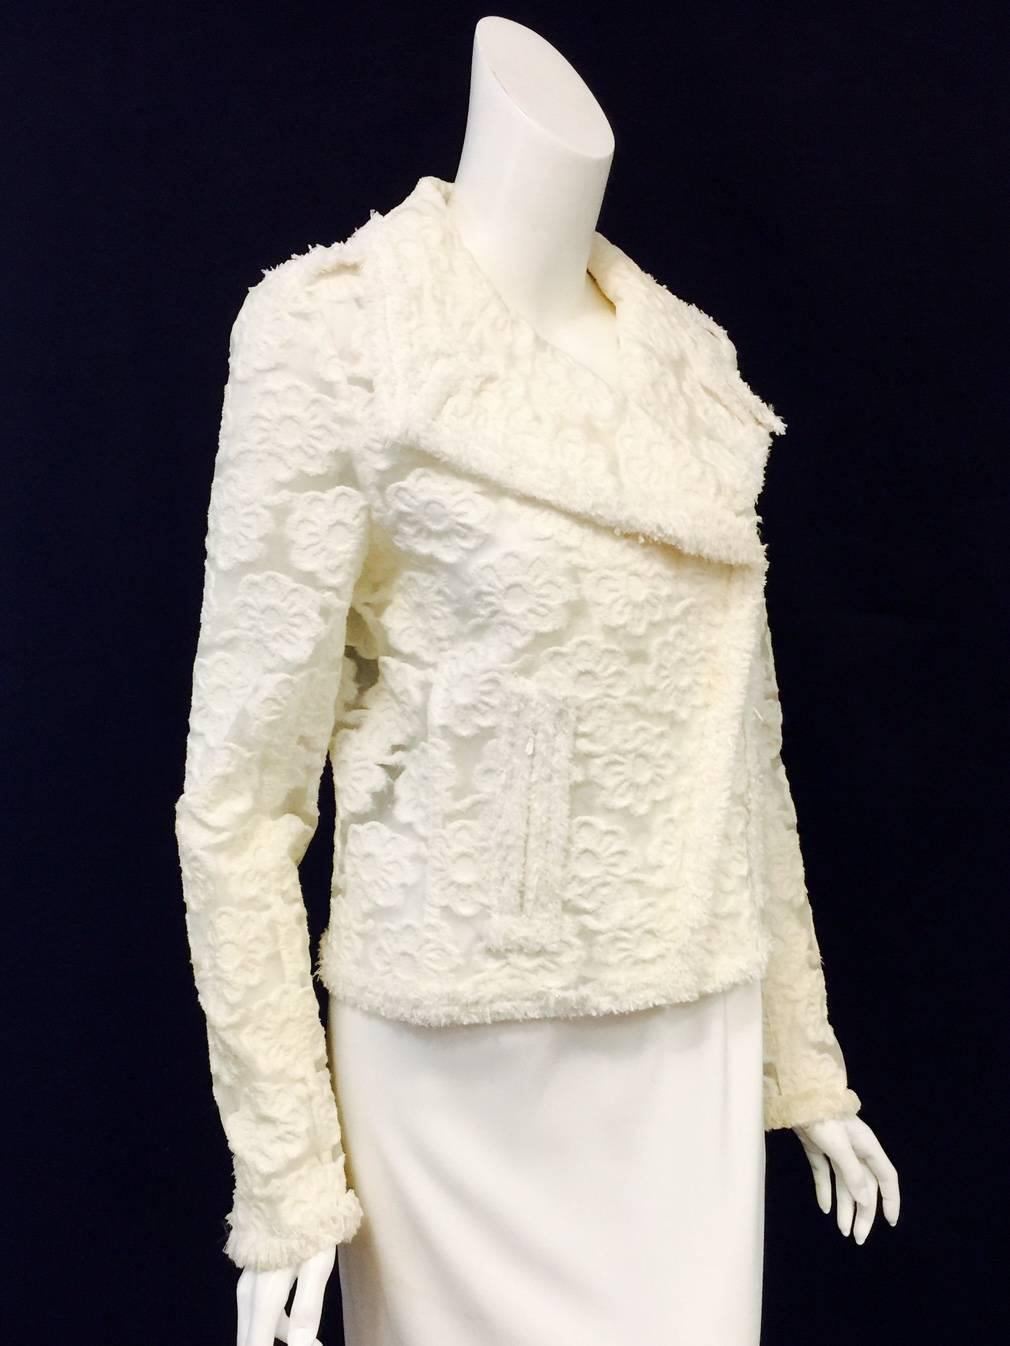 2009 Cruise Chanel Ivory Polyurethane Biker Jacket is worthy of Coco herself!  Inspired by Marlon Brando's unforgettable presence on the Silver Screen, this jacket is contemporary, chic, and sophisticated. Features technologically advanced sheer